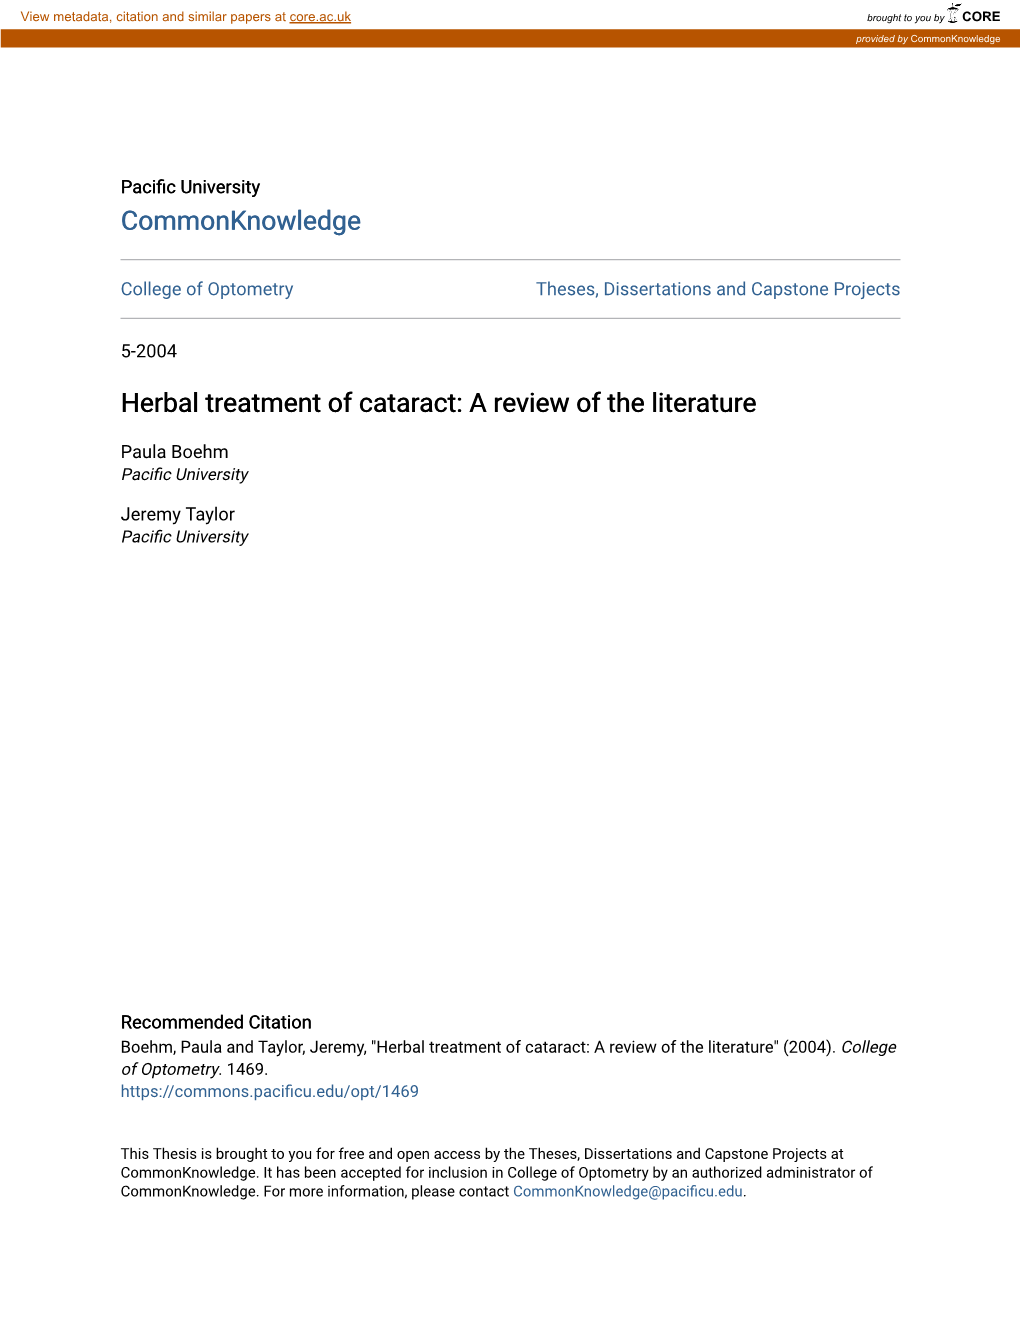 Herbal Treatment of Cataract: a Review of the Literature